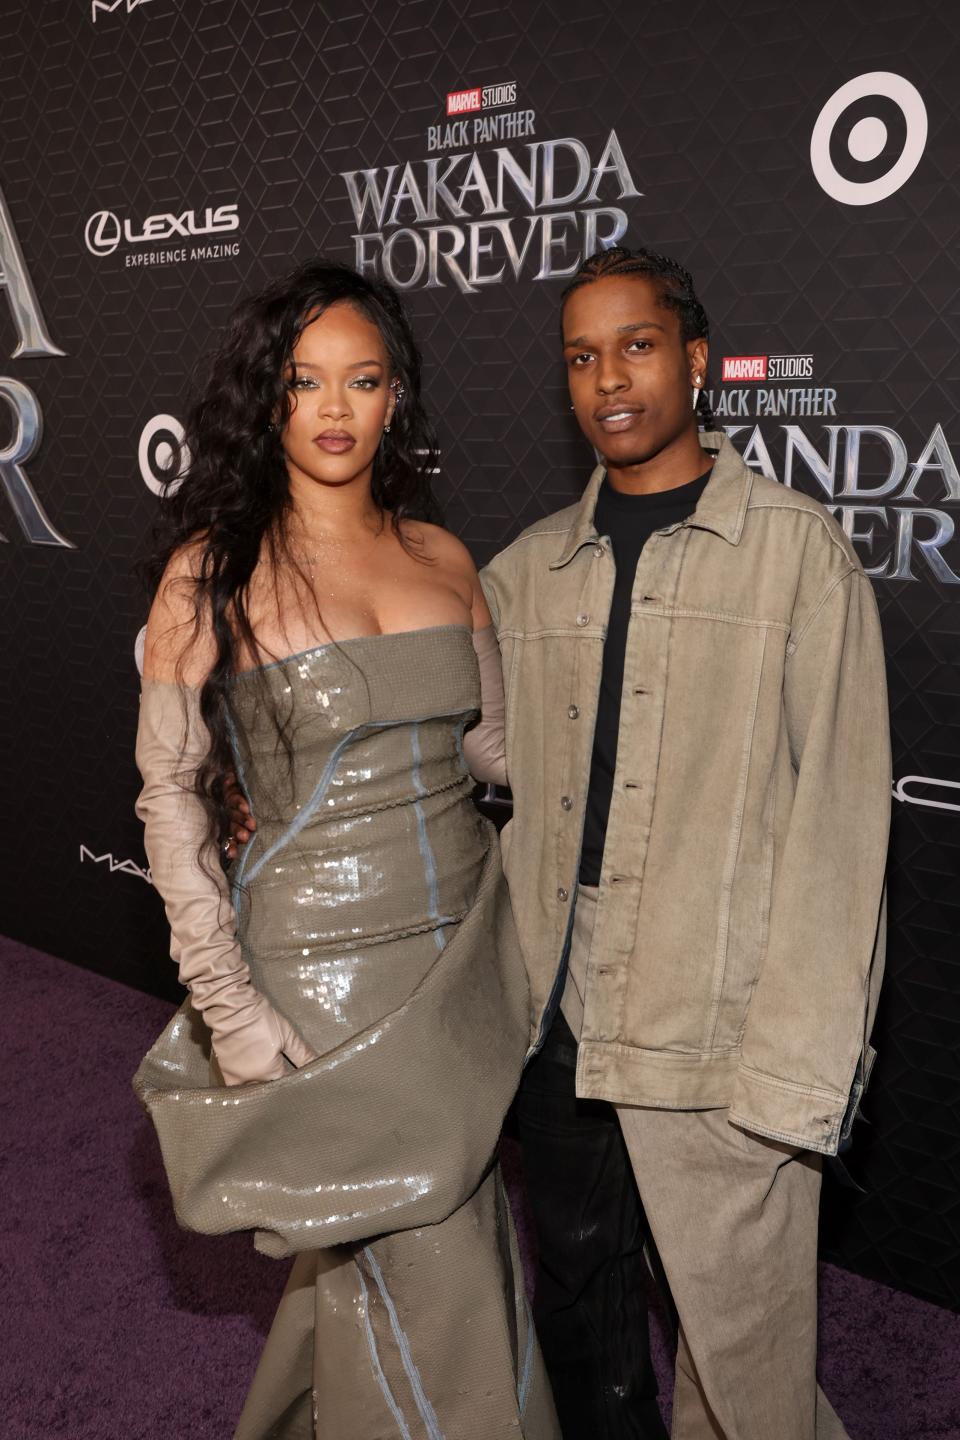 Rihanna and A$AP Rocky at the Black Panther: Wakanda Forever World Premiere wearing brown outifts